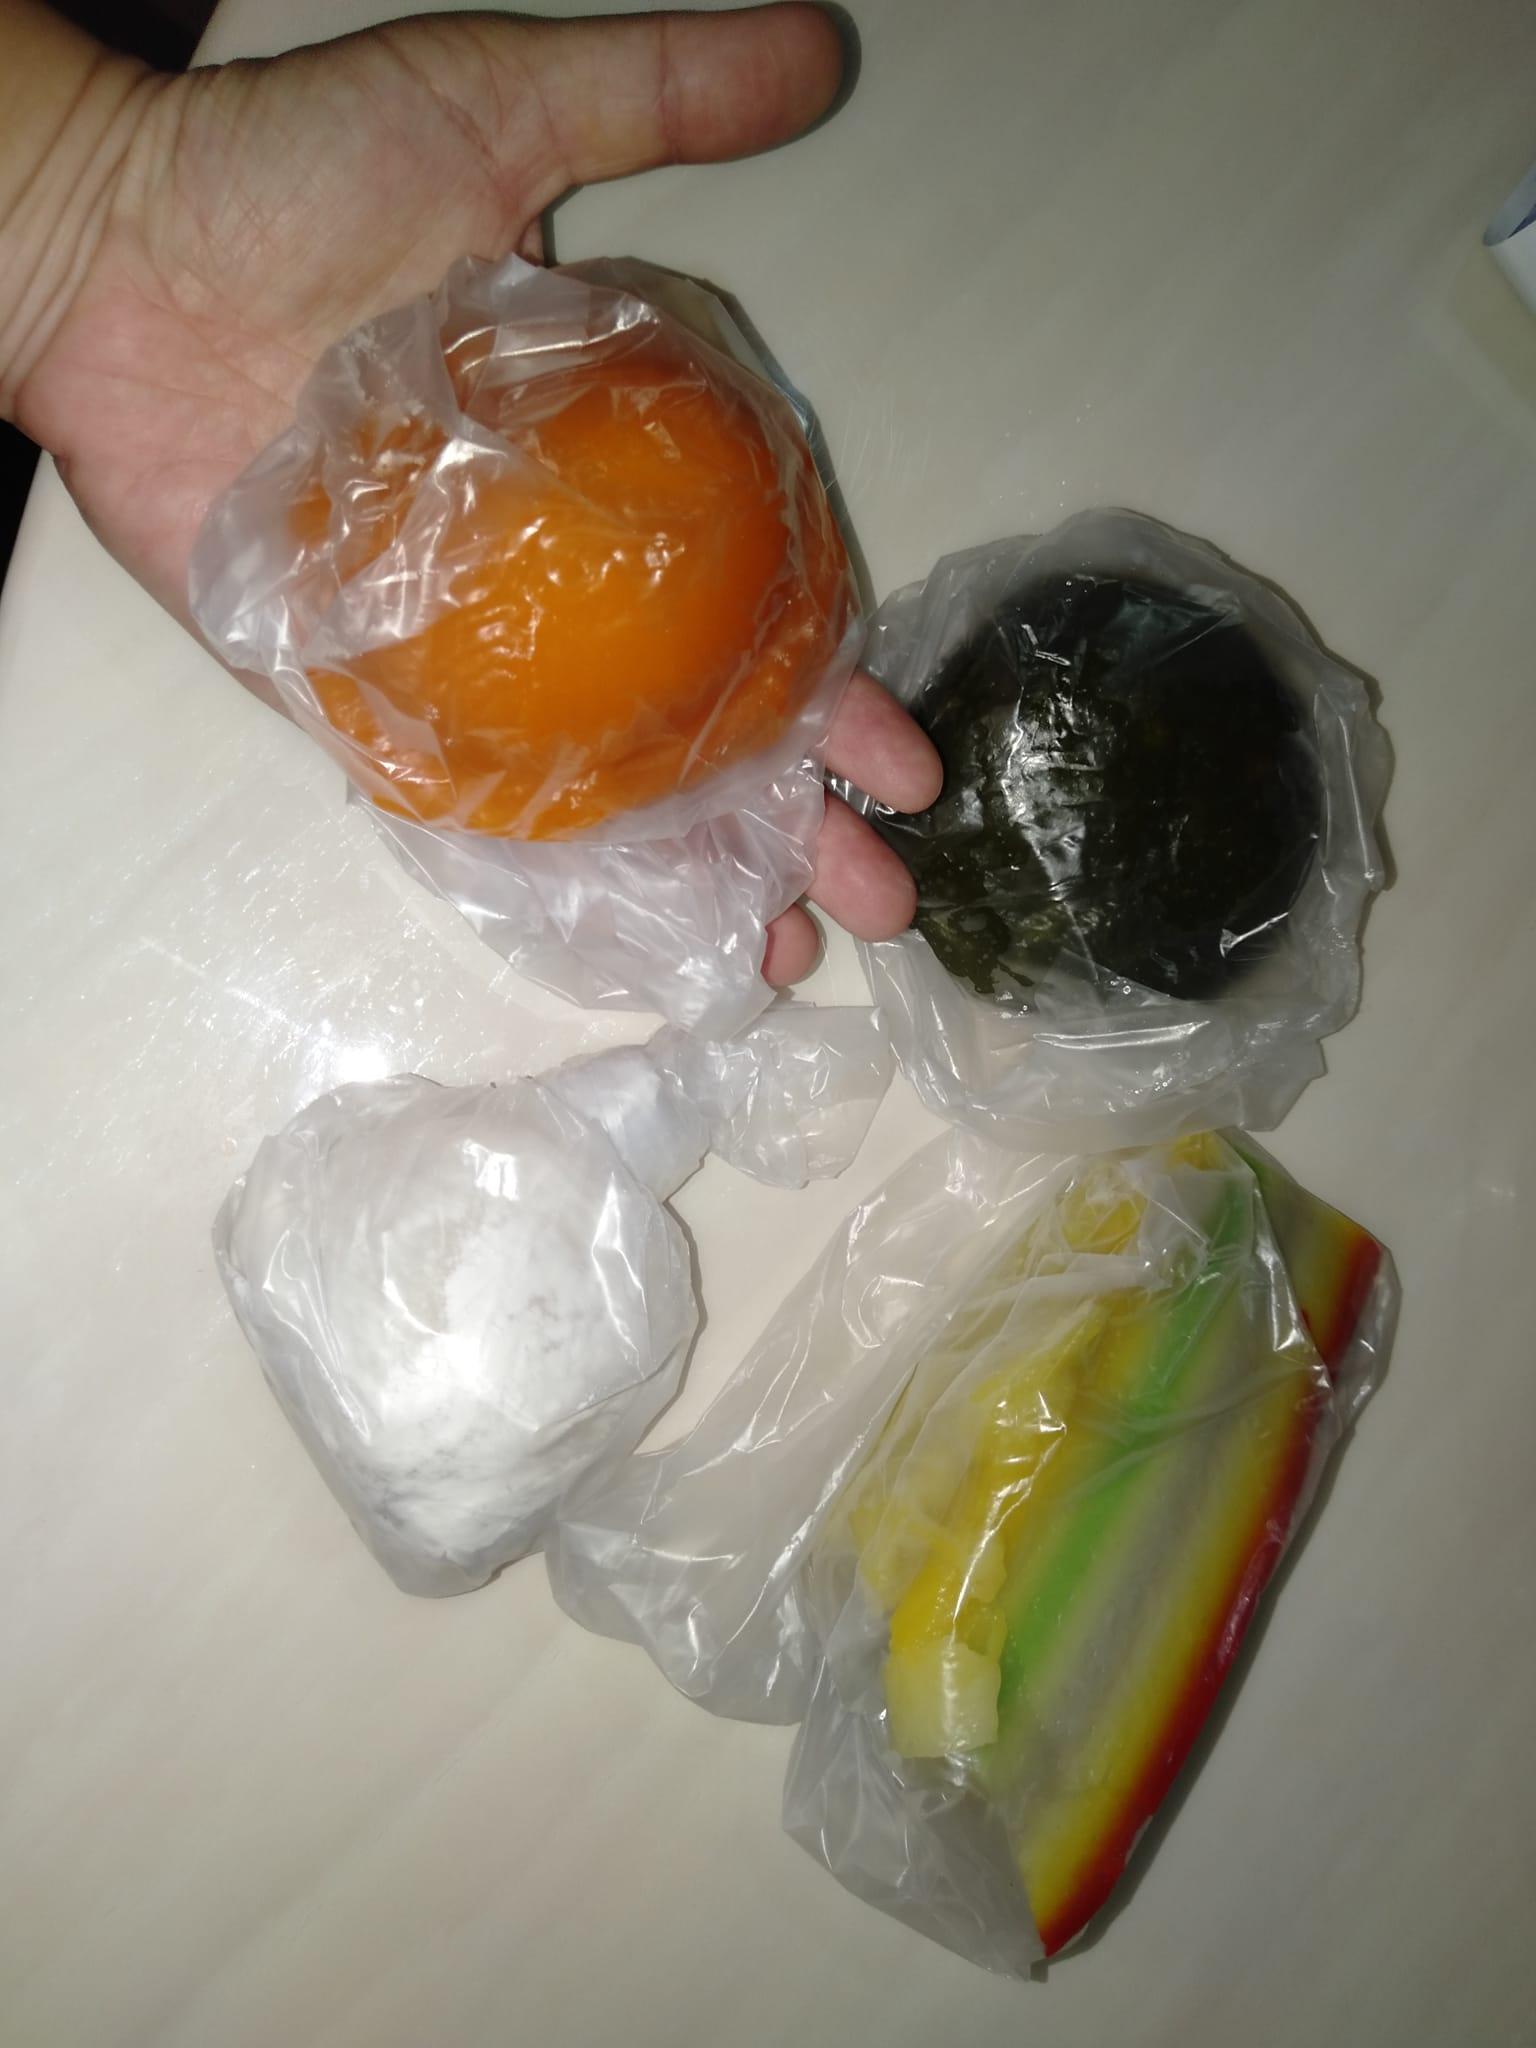 Johor woman pays nearly rm10 for 4 pieces of kuih, says it's cheaper in kl